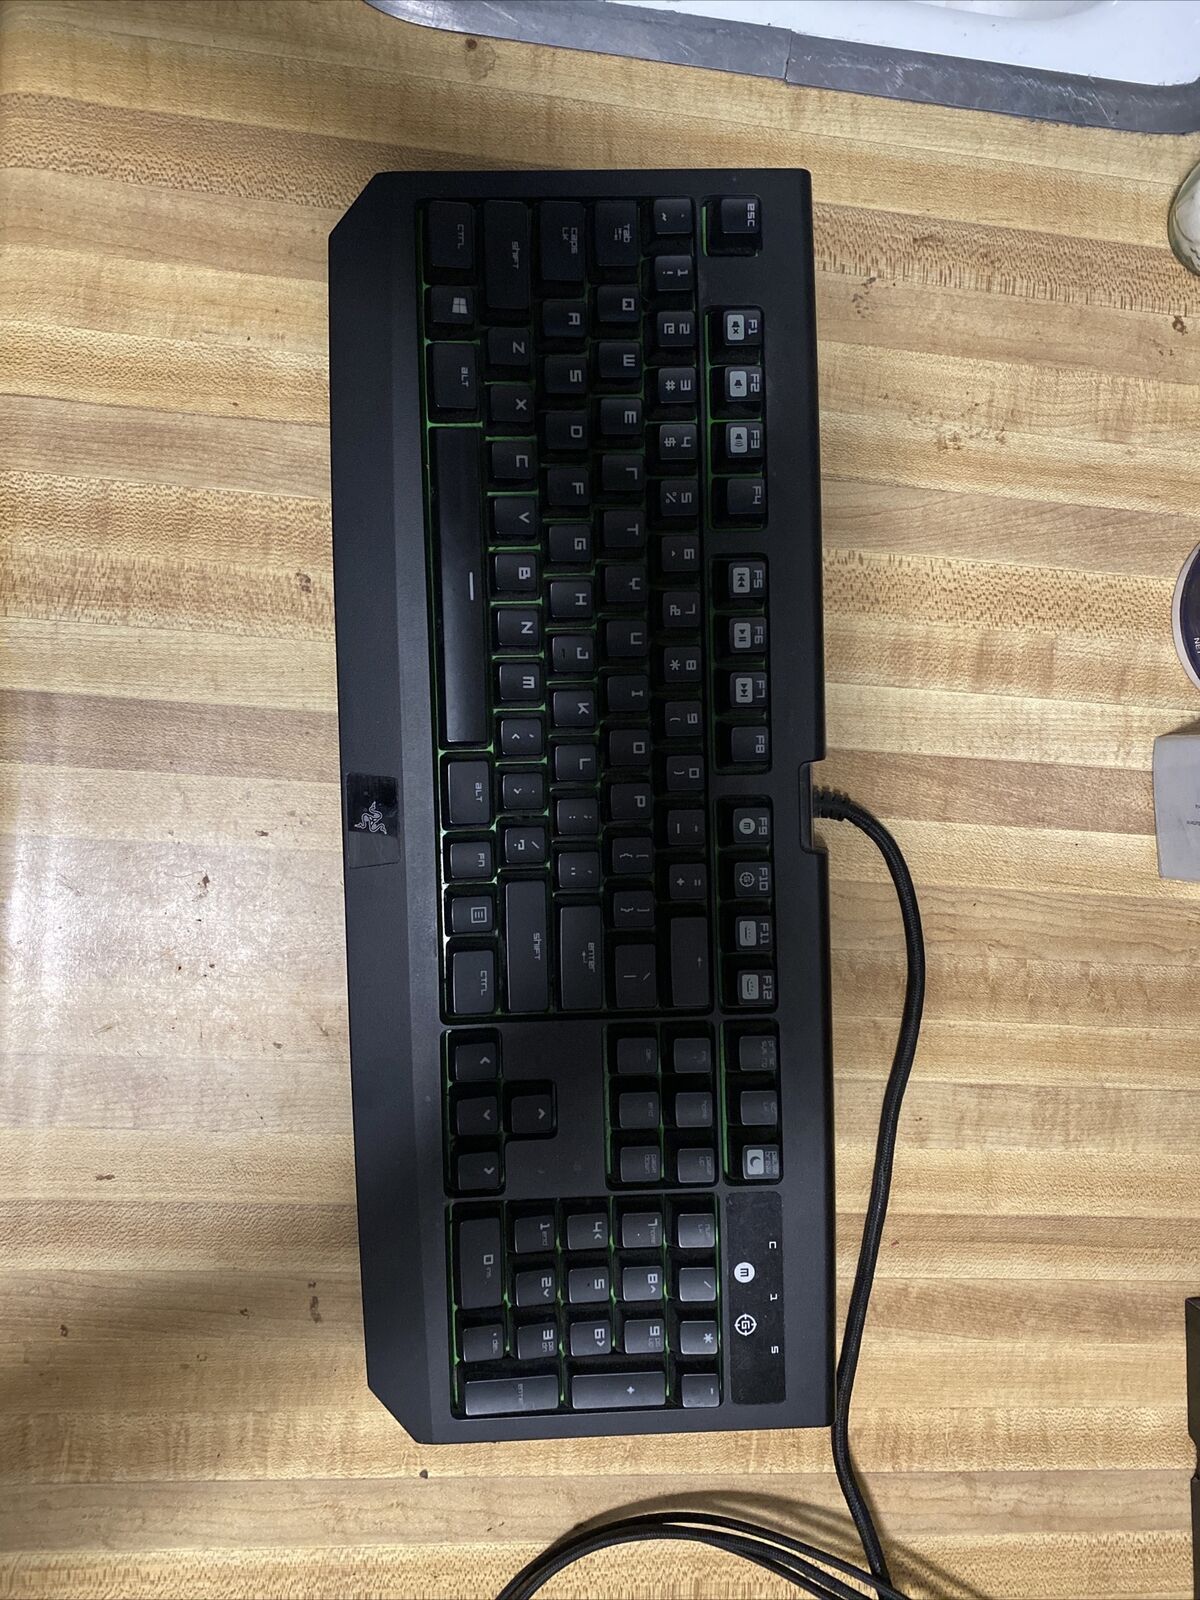 keyboard and mouse gaming